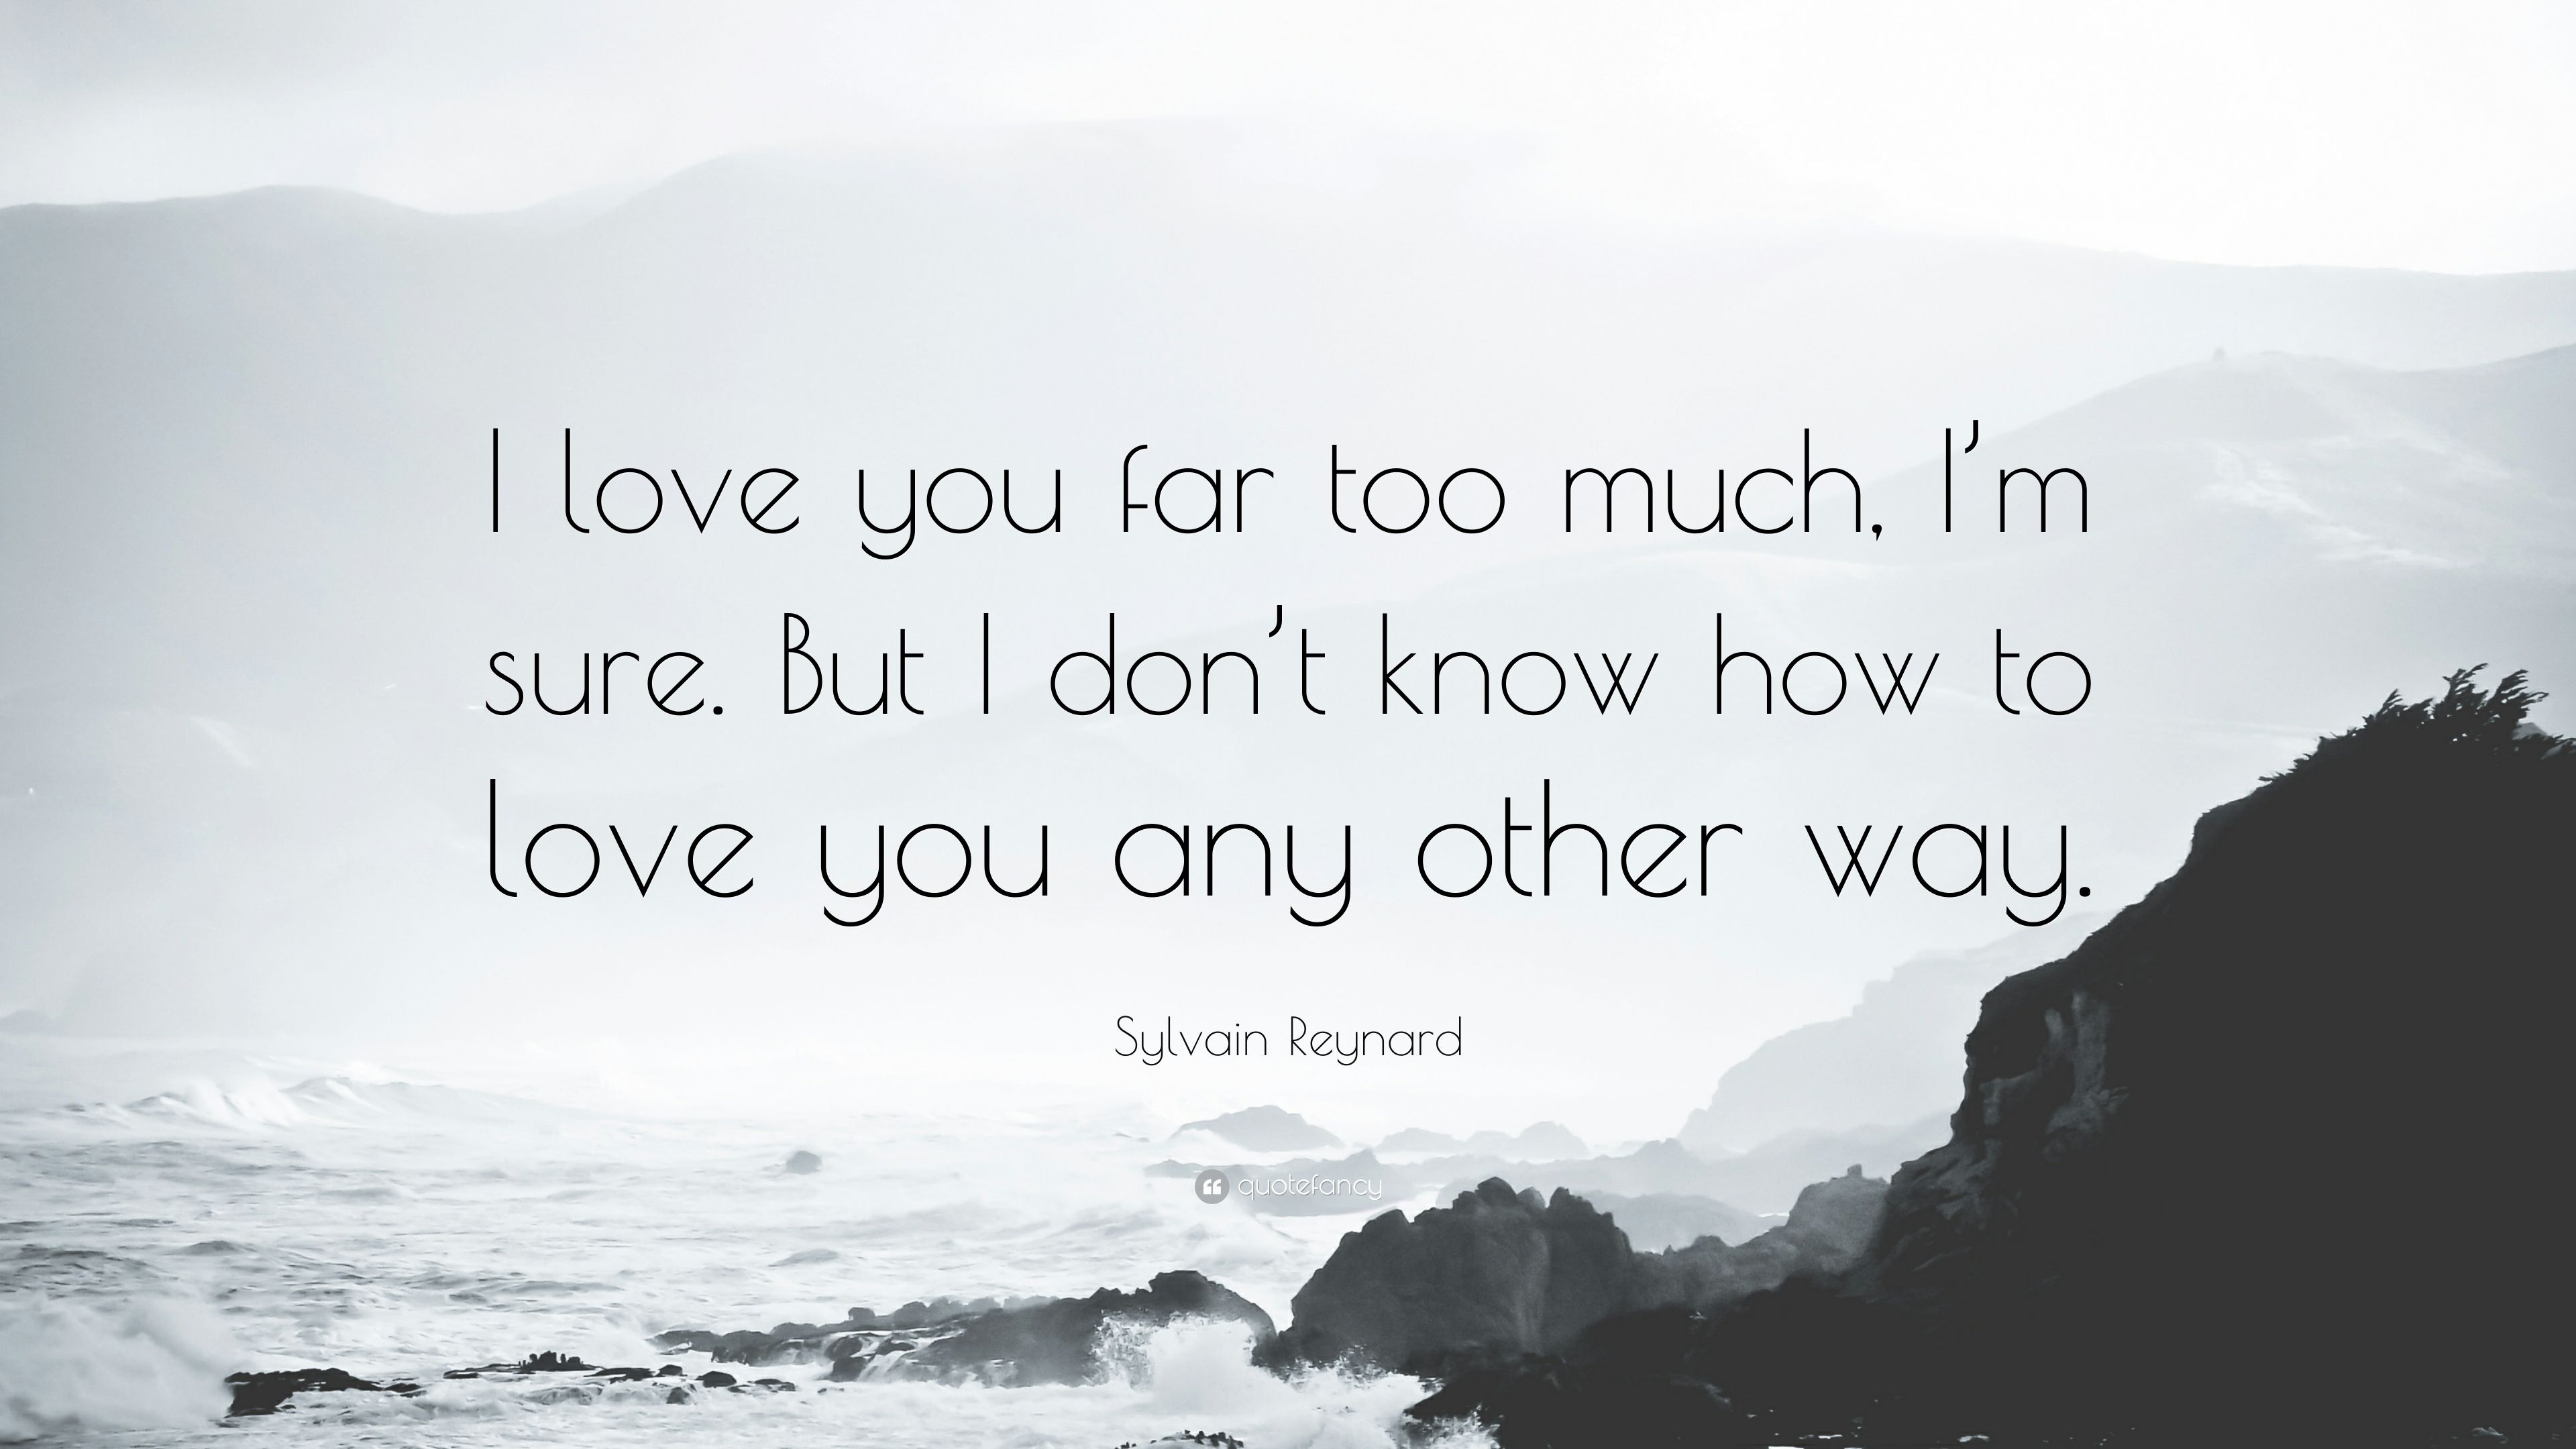 Sylvain Reynard Quote: “I love you far too much, I'm sure. But I don't know how to love you any other way.” (7 wallpaper)